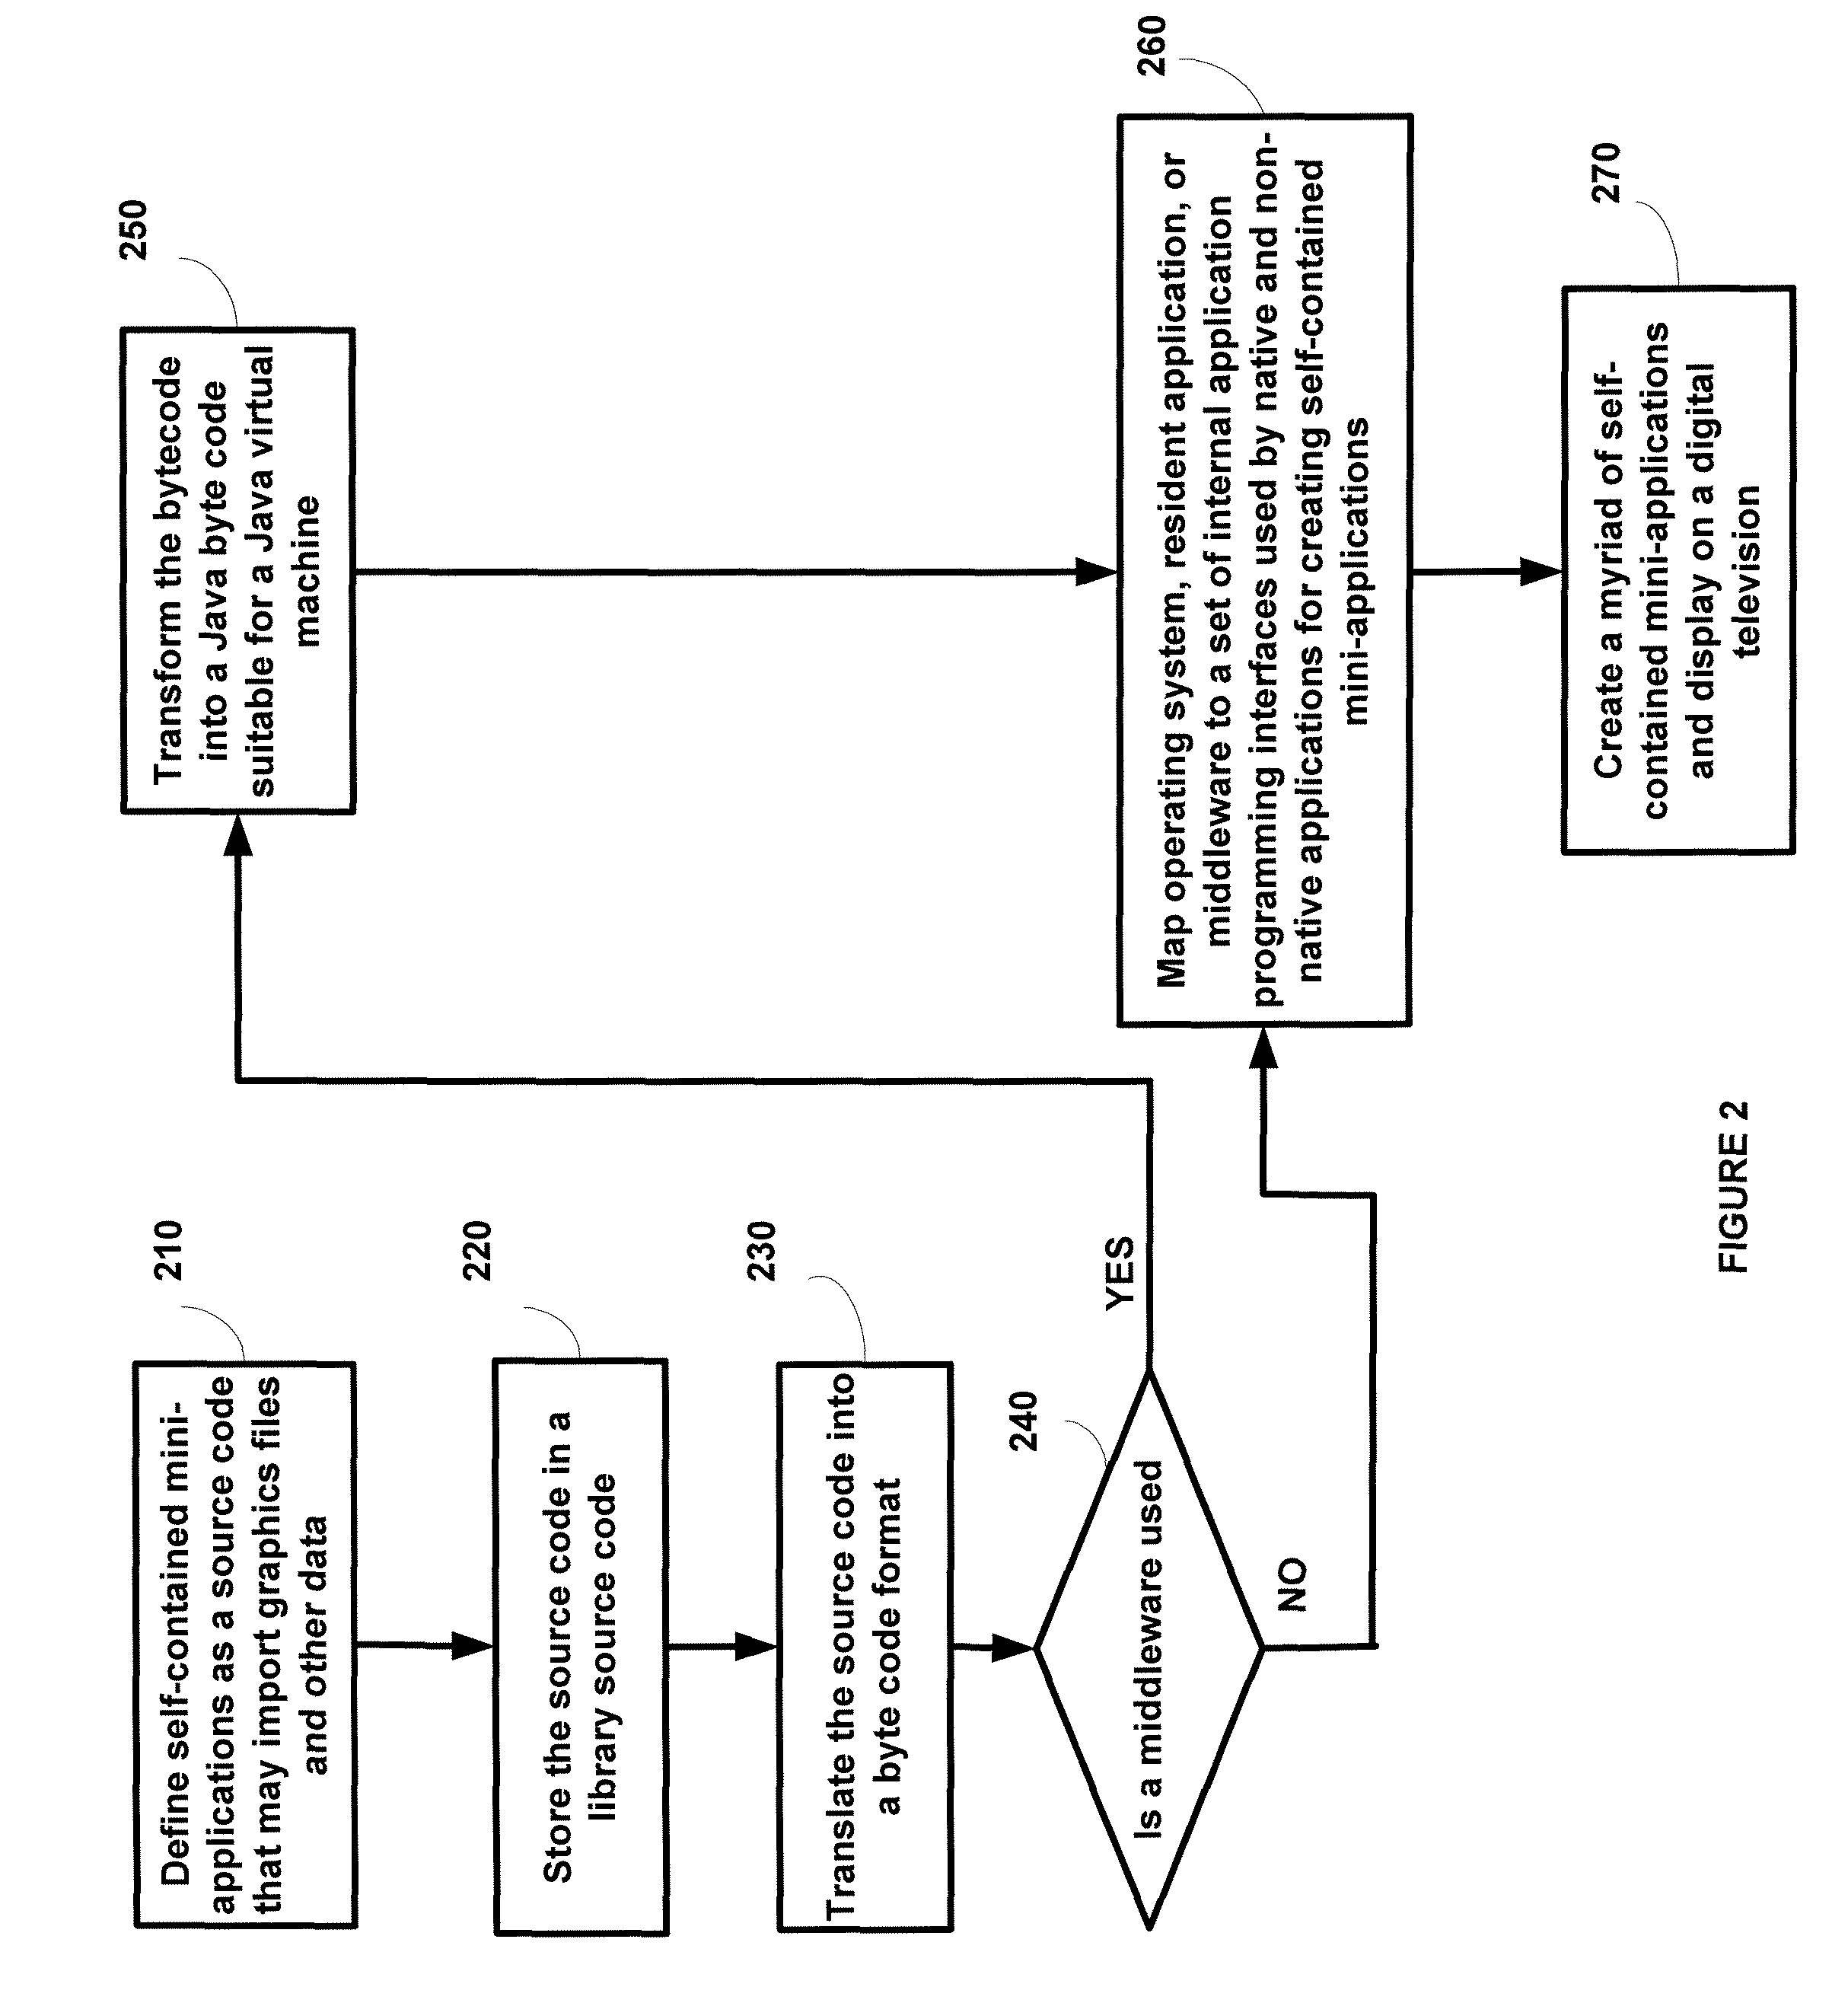 Self-contained mini-applications system and method for digital television